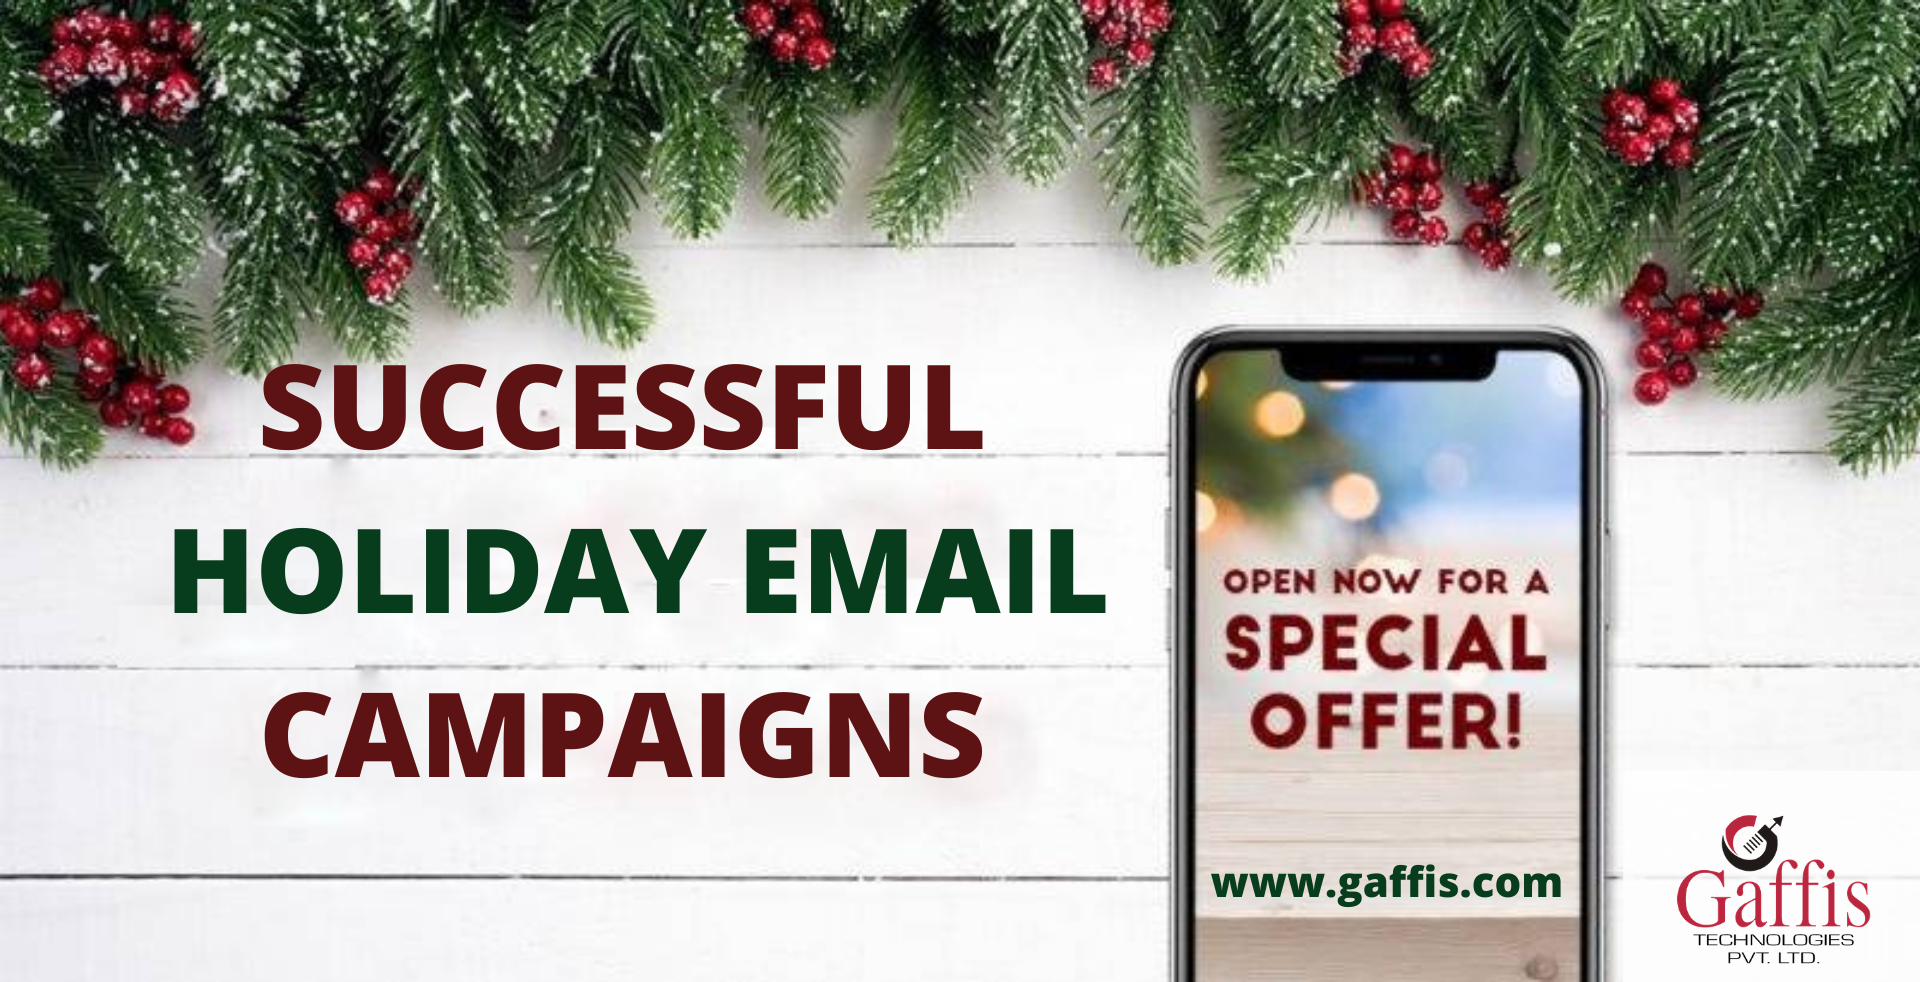 Successful Holiday Email Marketing Best Practices for 2020